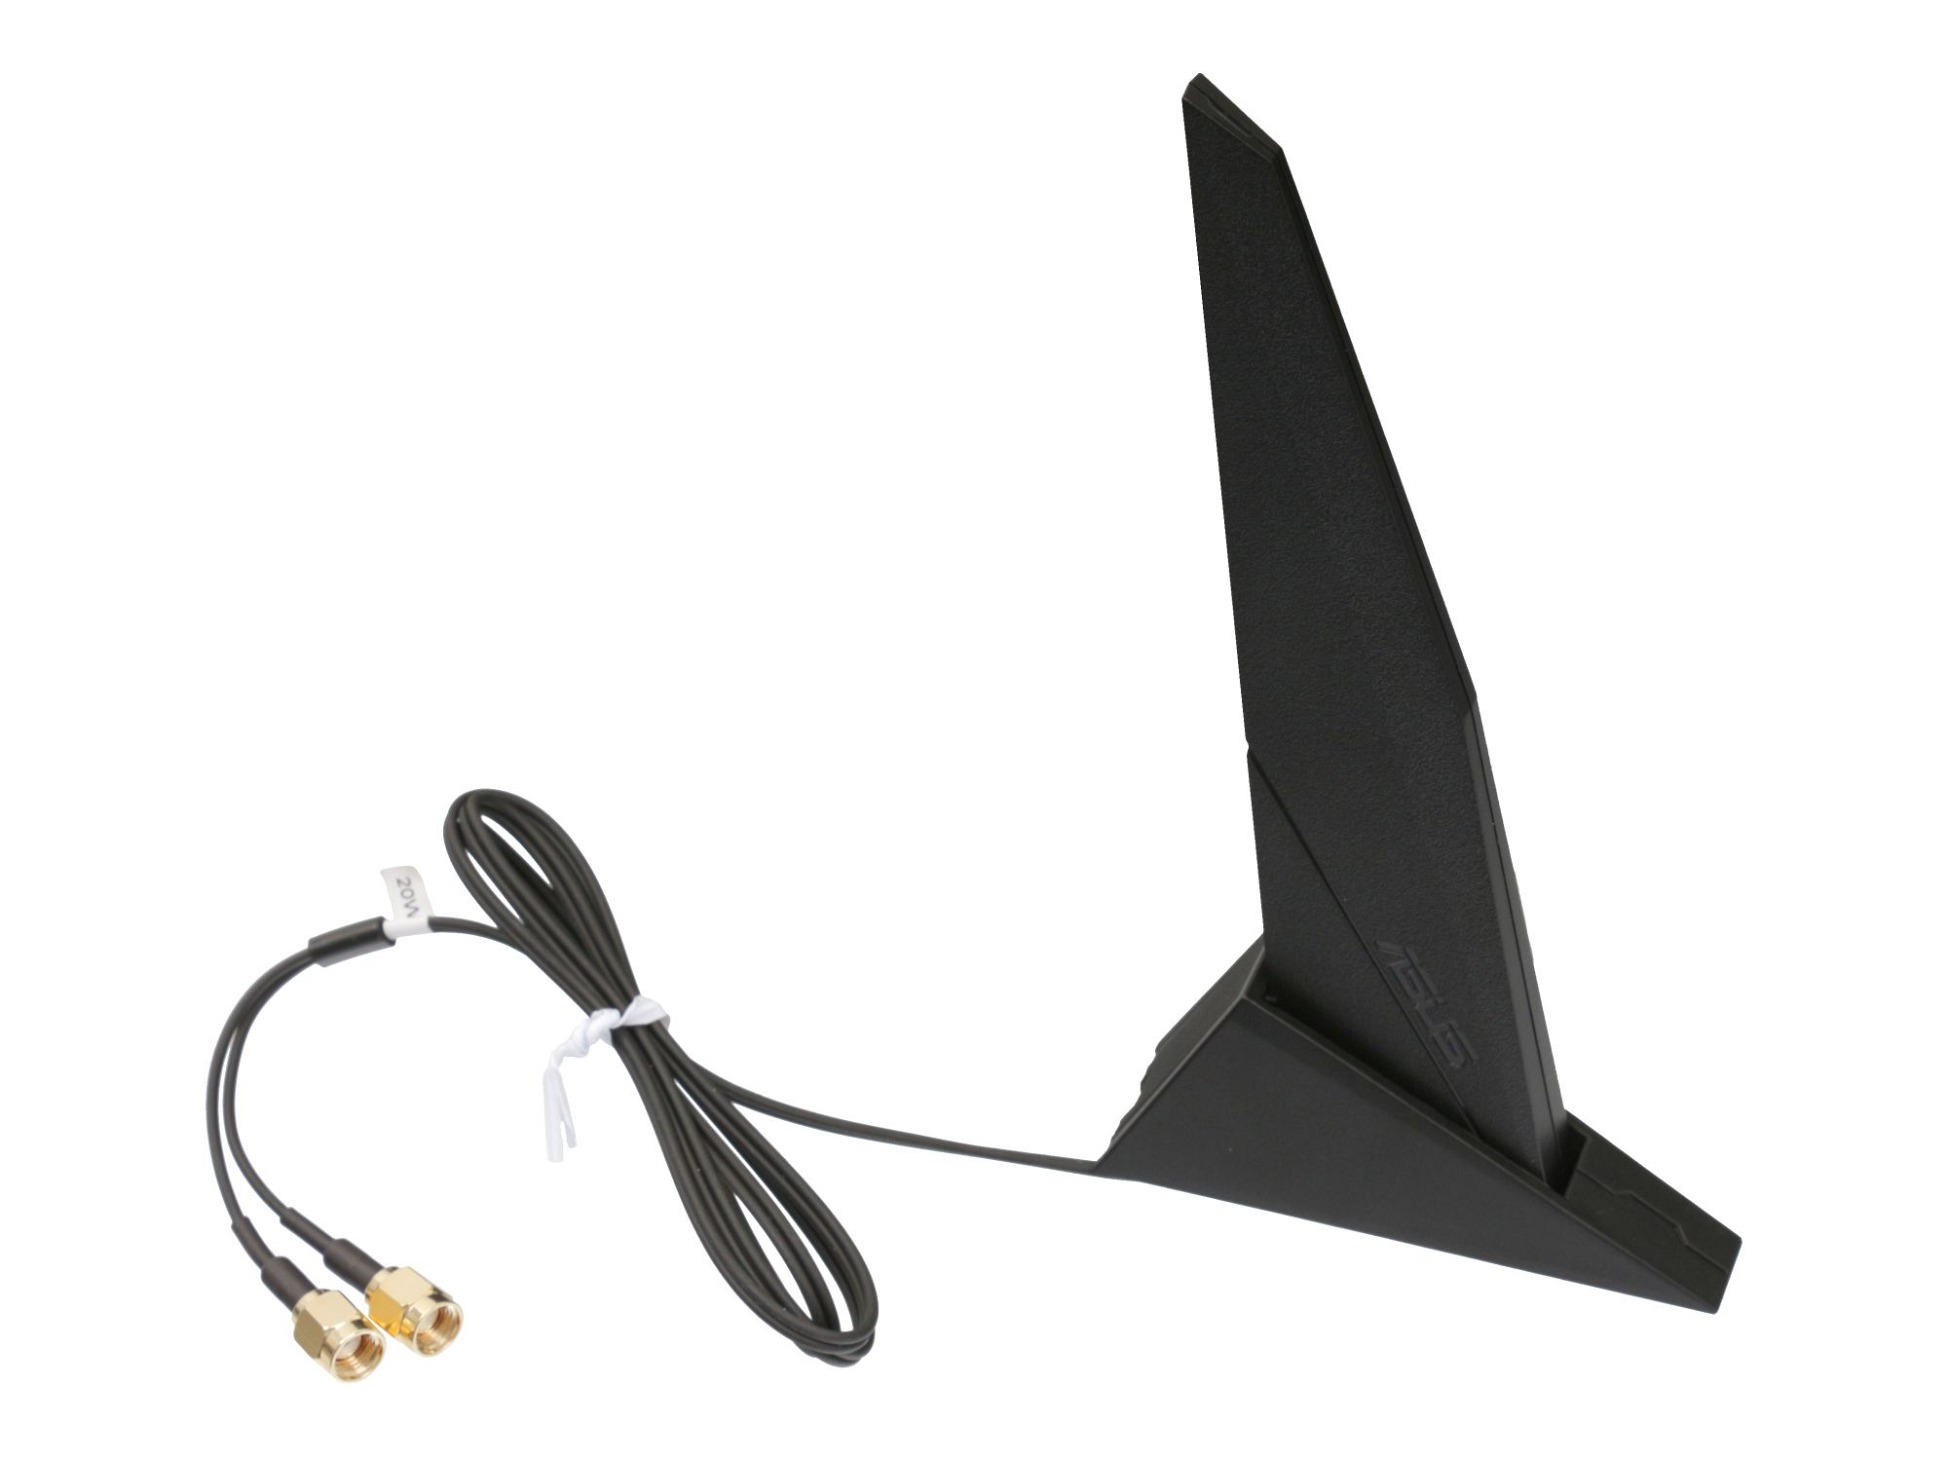 Externe Asus RP-SMA DIPOLE Antenne für Asus ROG Strix B560-A Gaming WIFI